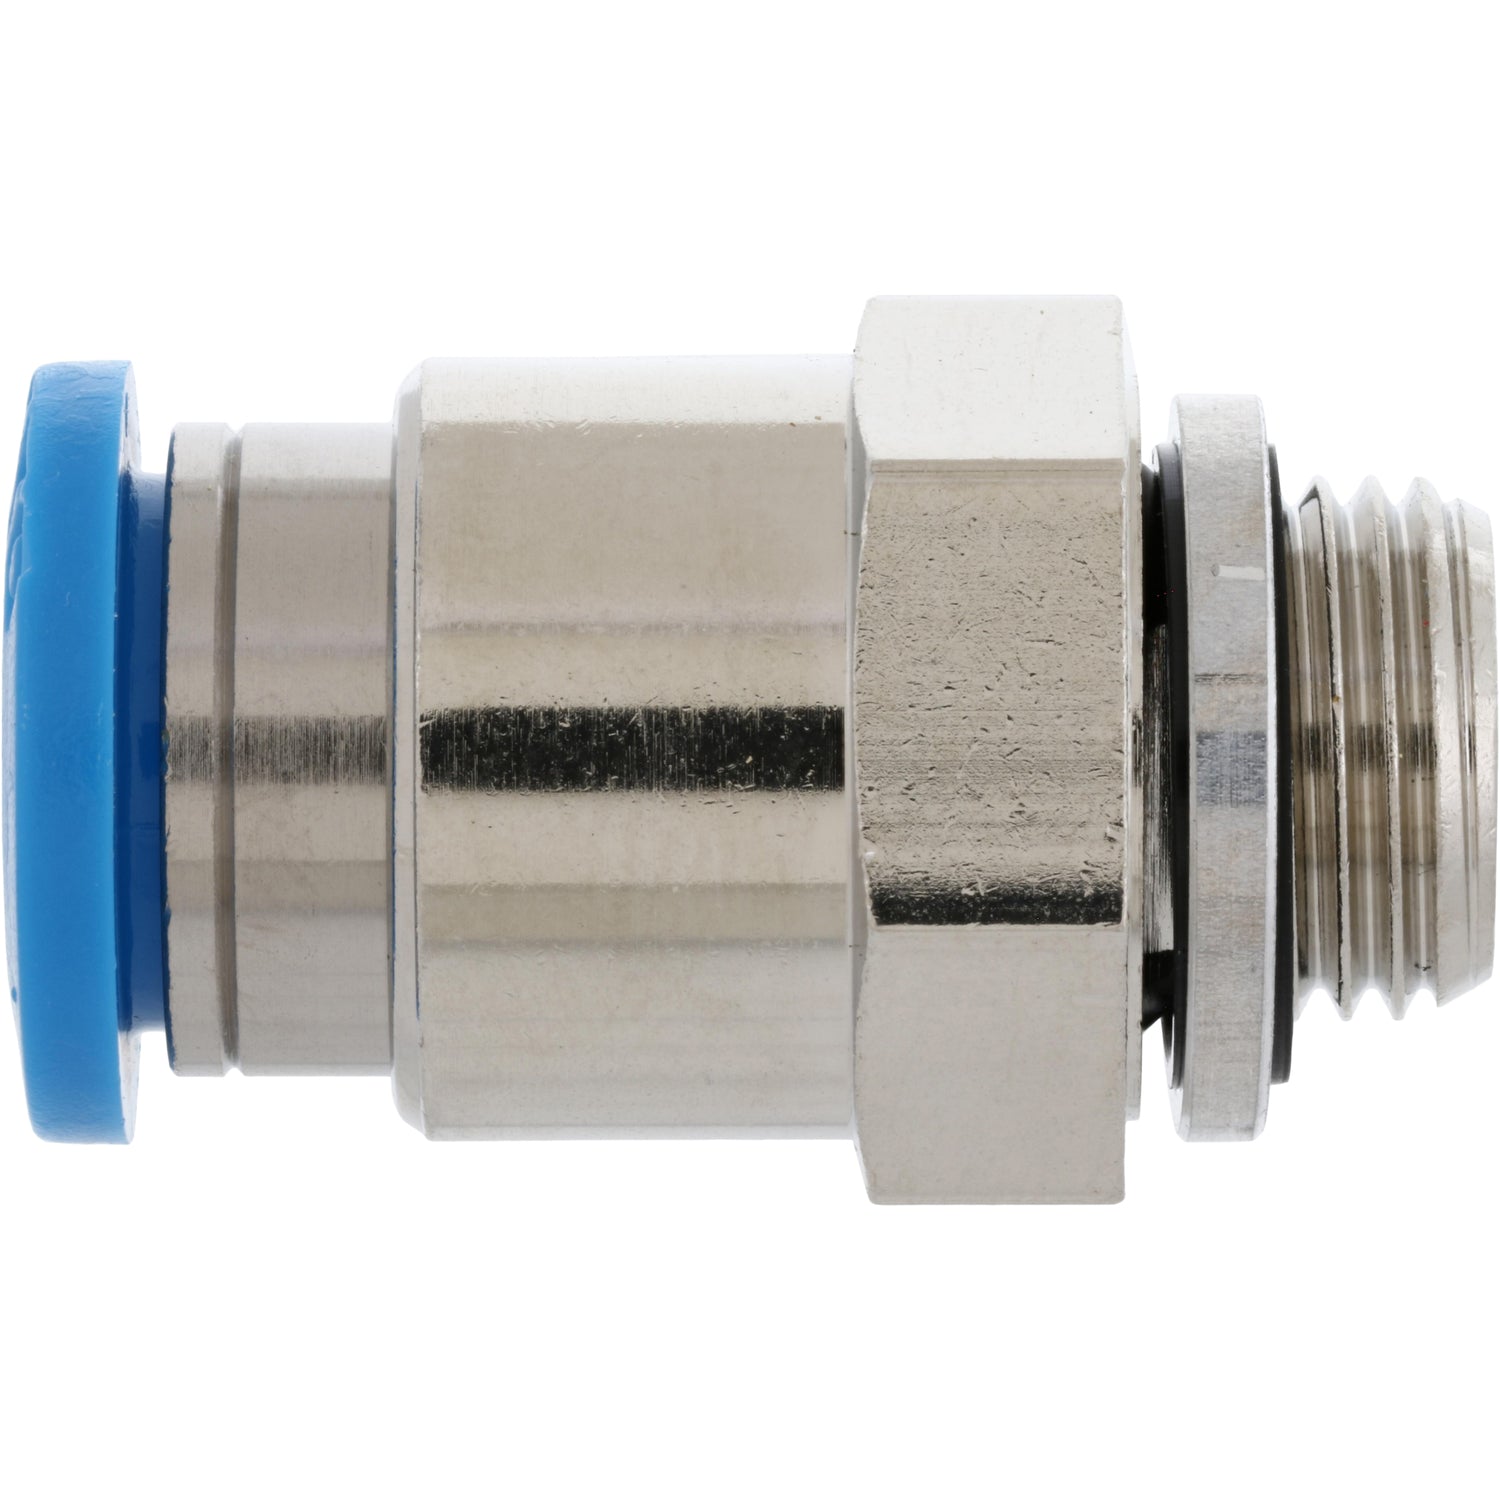 Nickel-plated push-in air fitting with threads and blue collared releasing ring showing. Part on white background.